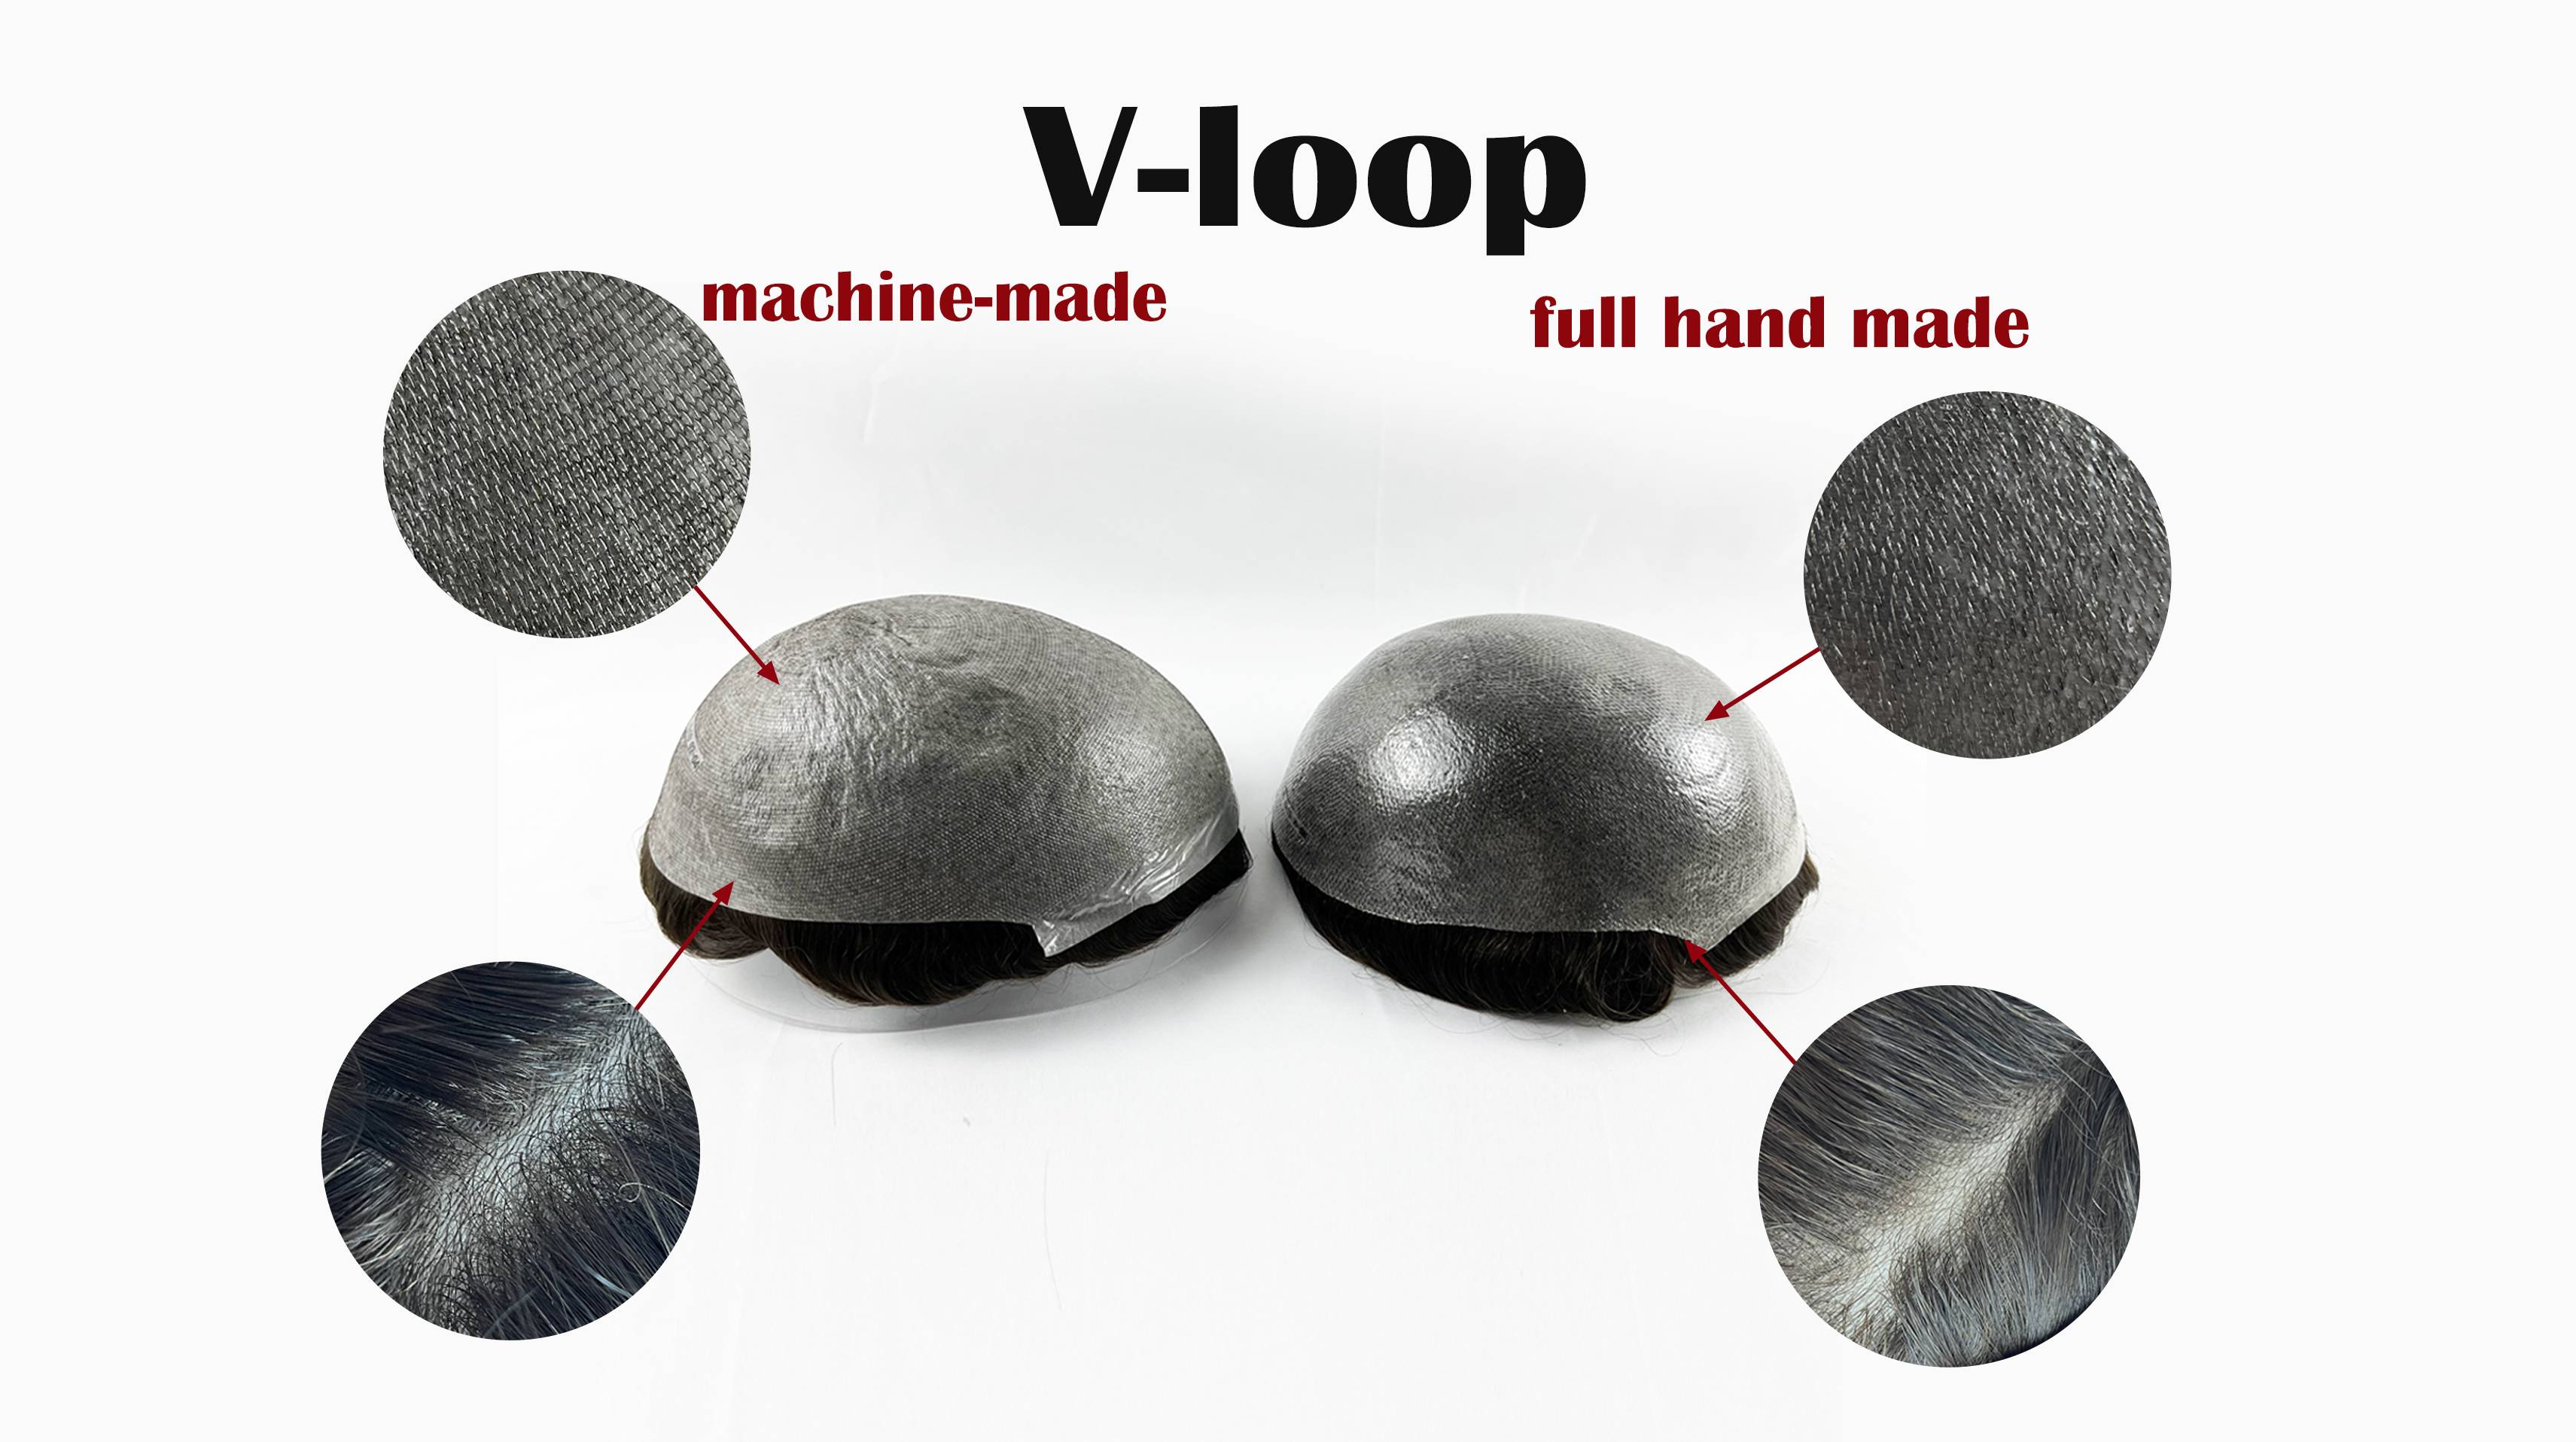 Difference between hand made V-loop and Machine made V-loop(1).jpg